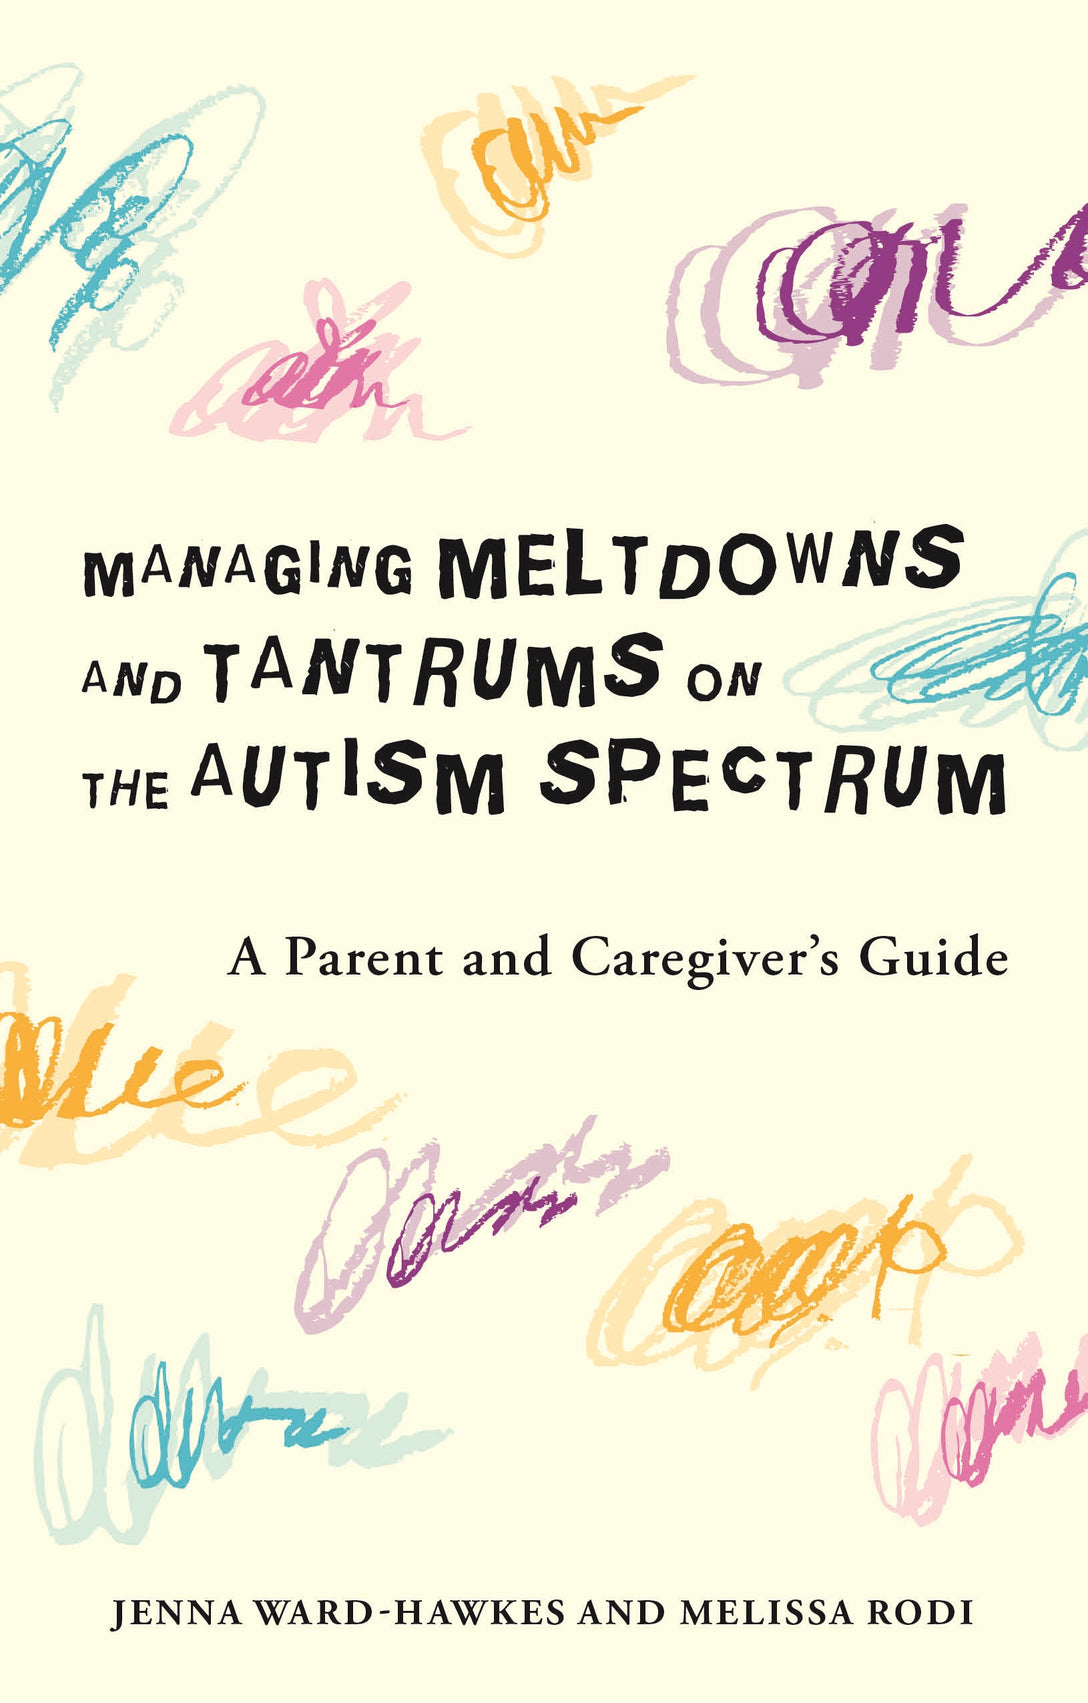 Managing Meltdowns and Tantrums on the Autism Spectrum by Paul Banwell, Melissa Rodi, Jenna Ward-Hawkes